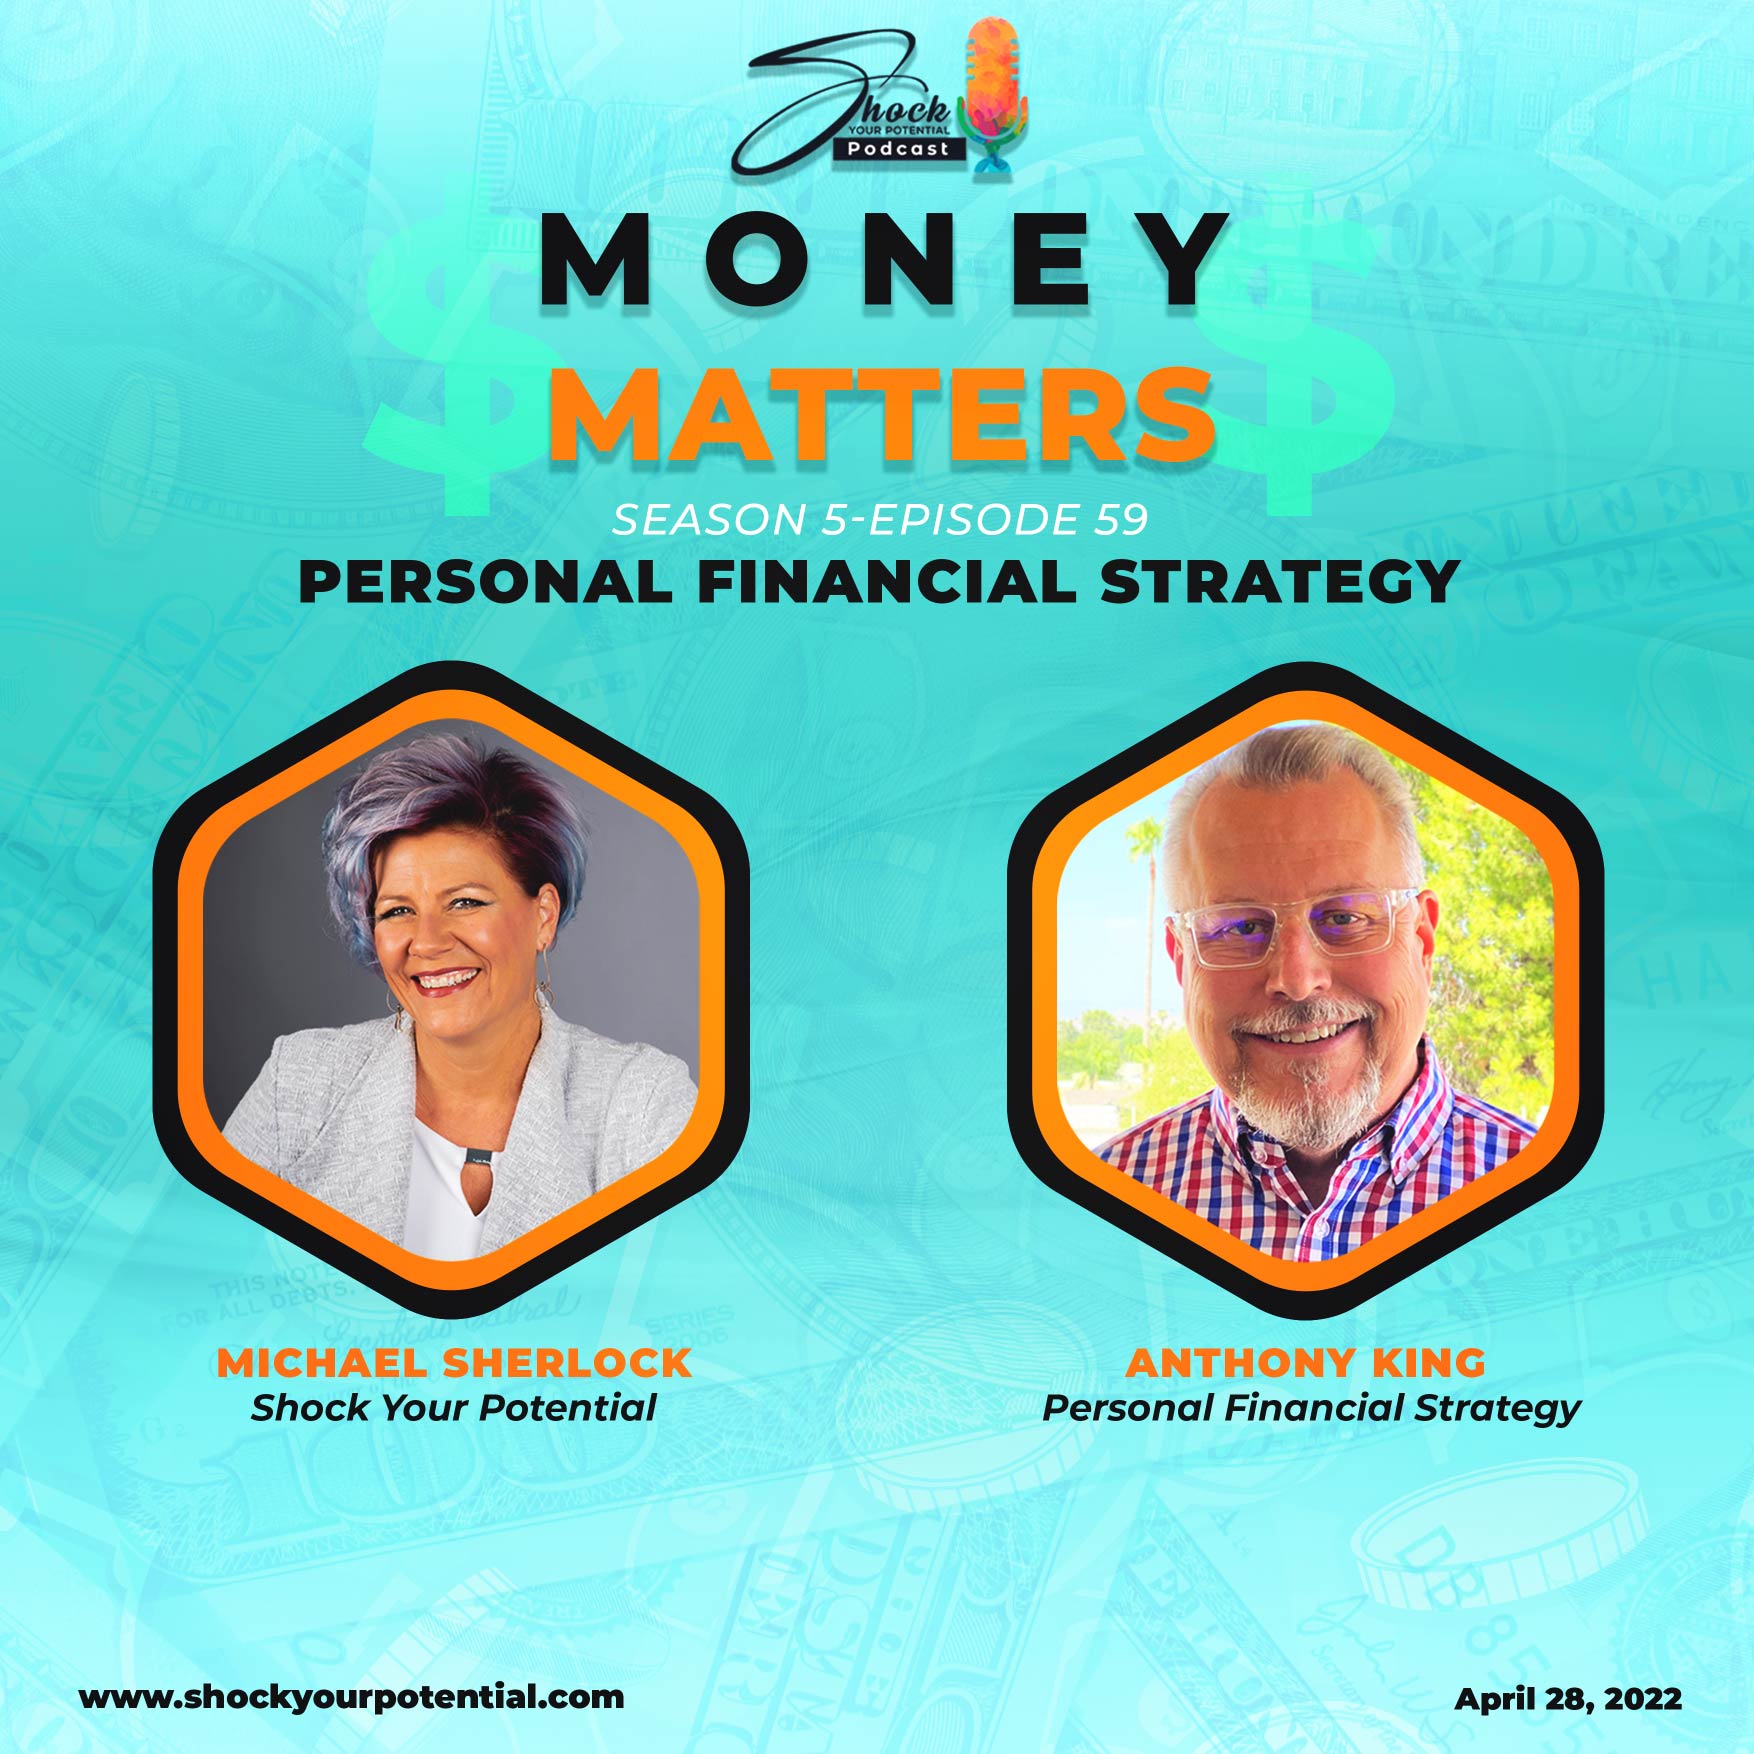 Personal Financial Strategy – Anthony King